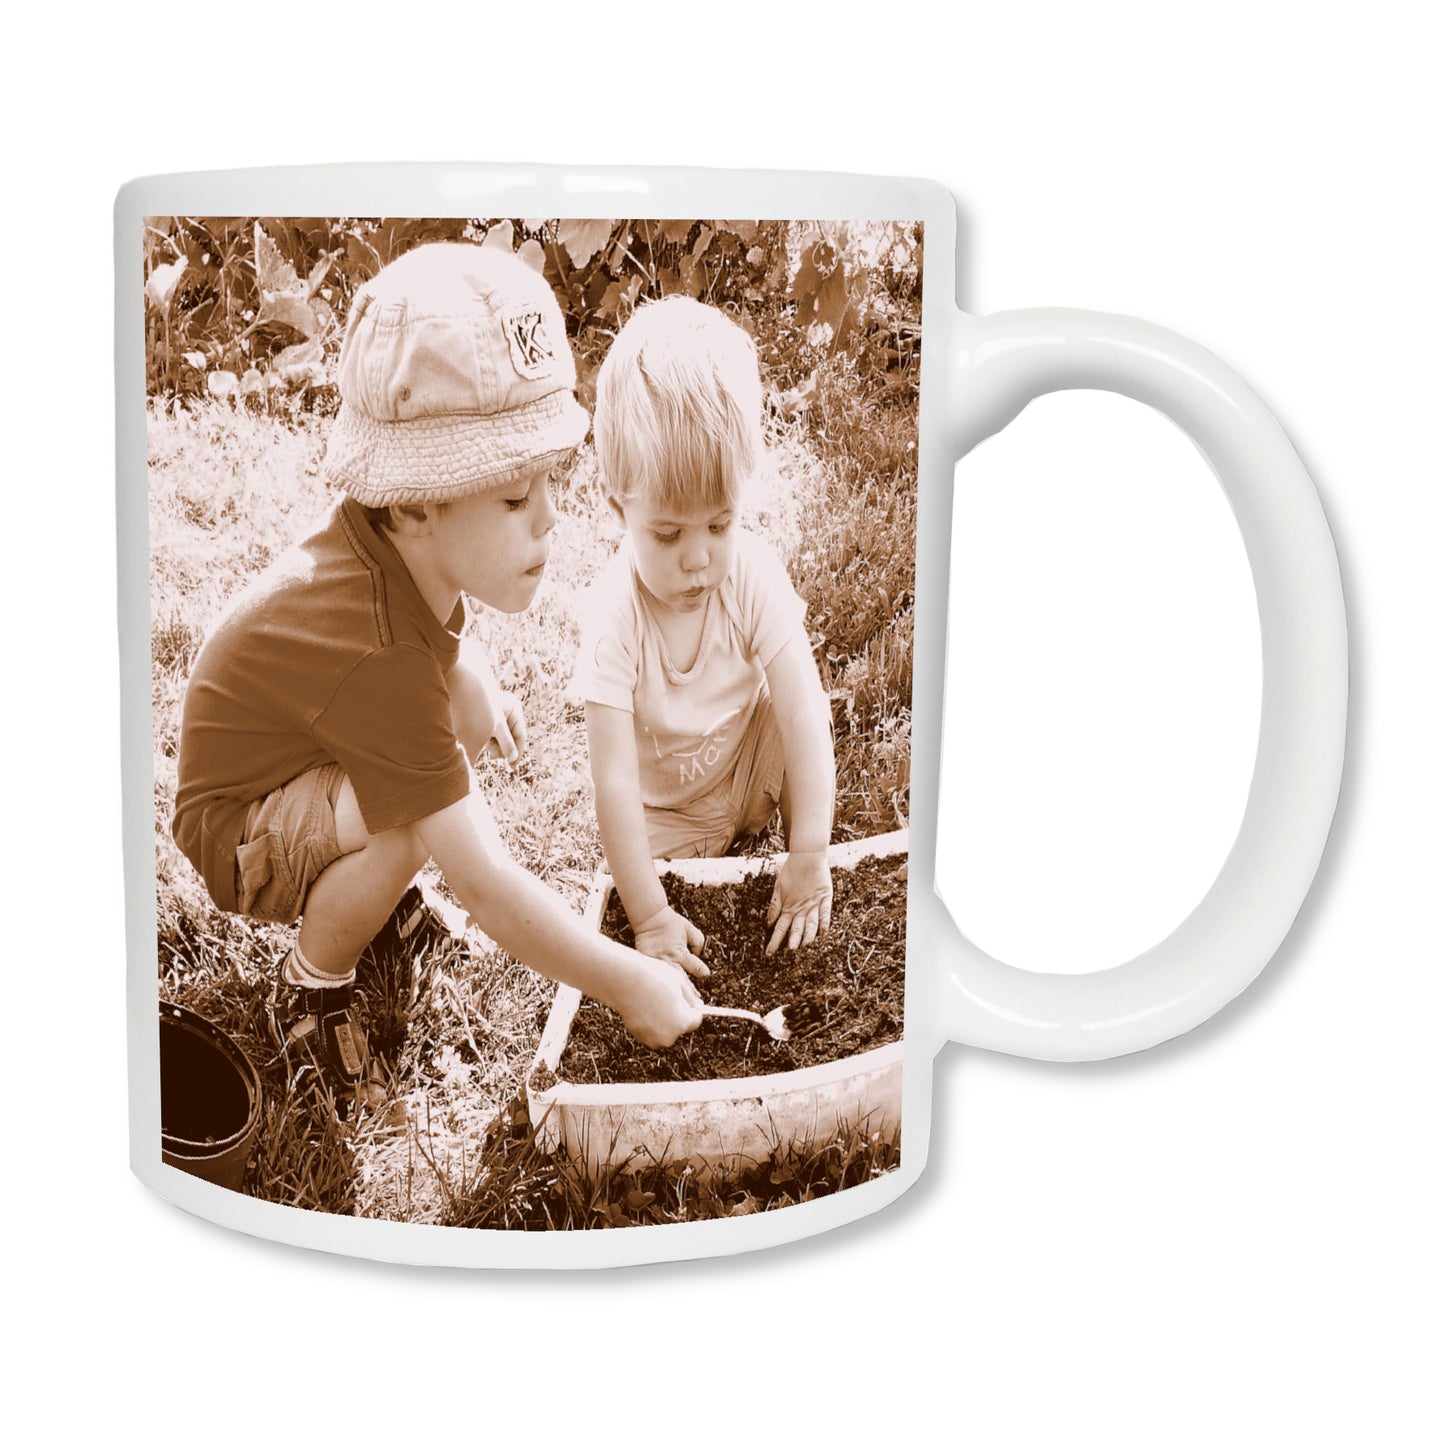 Personalized mug with your photo